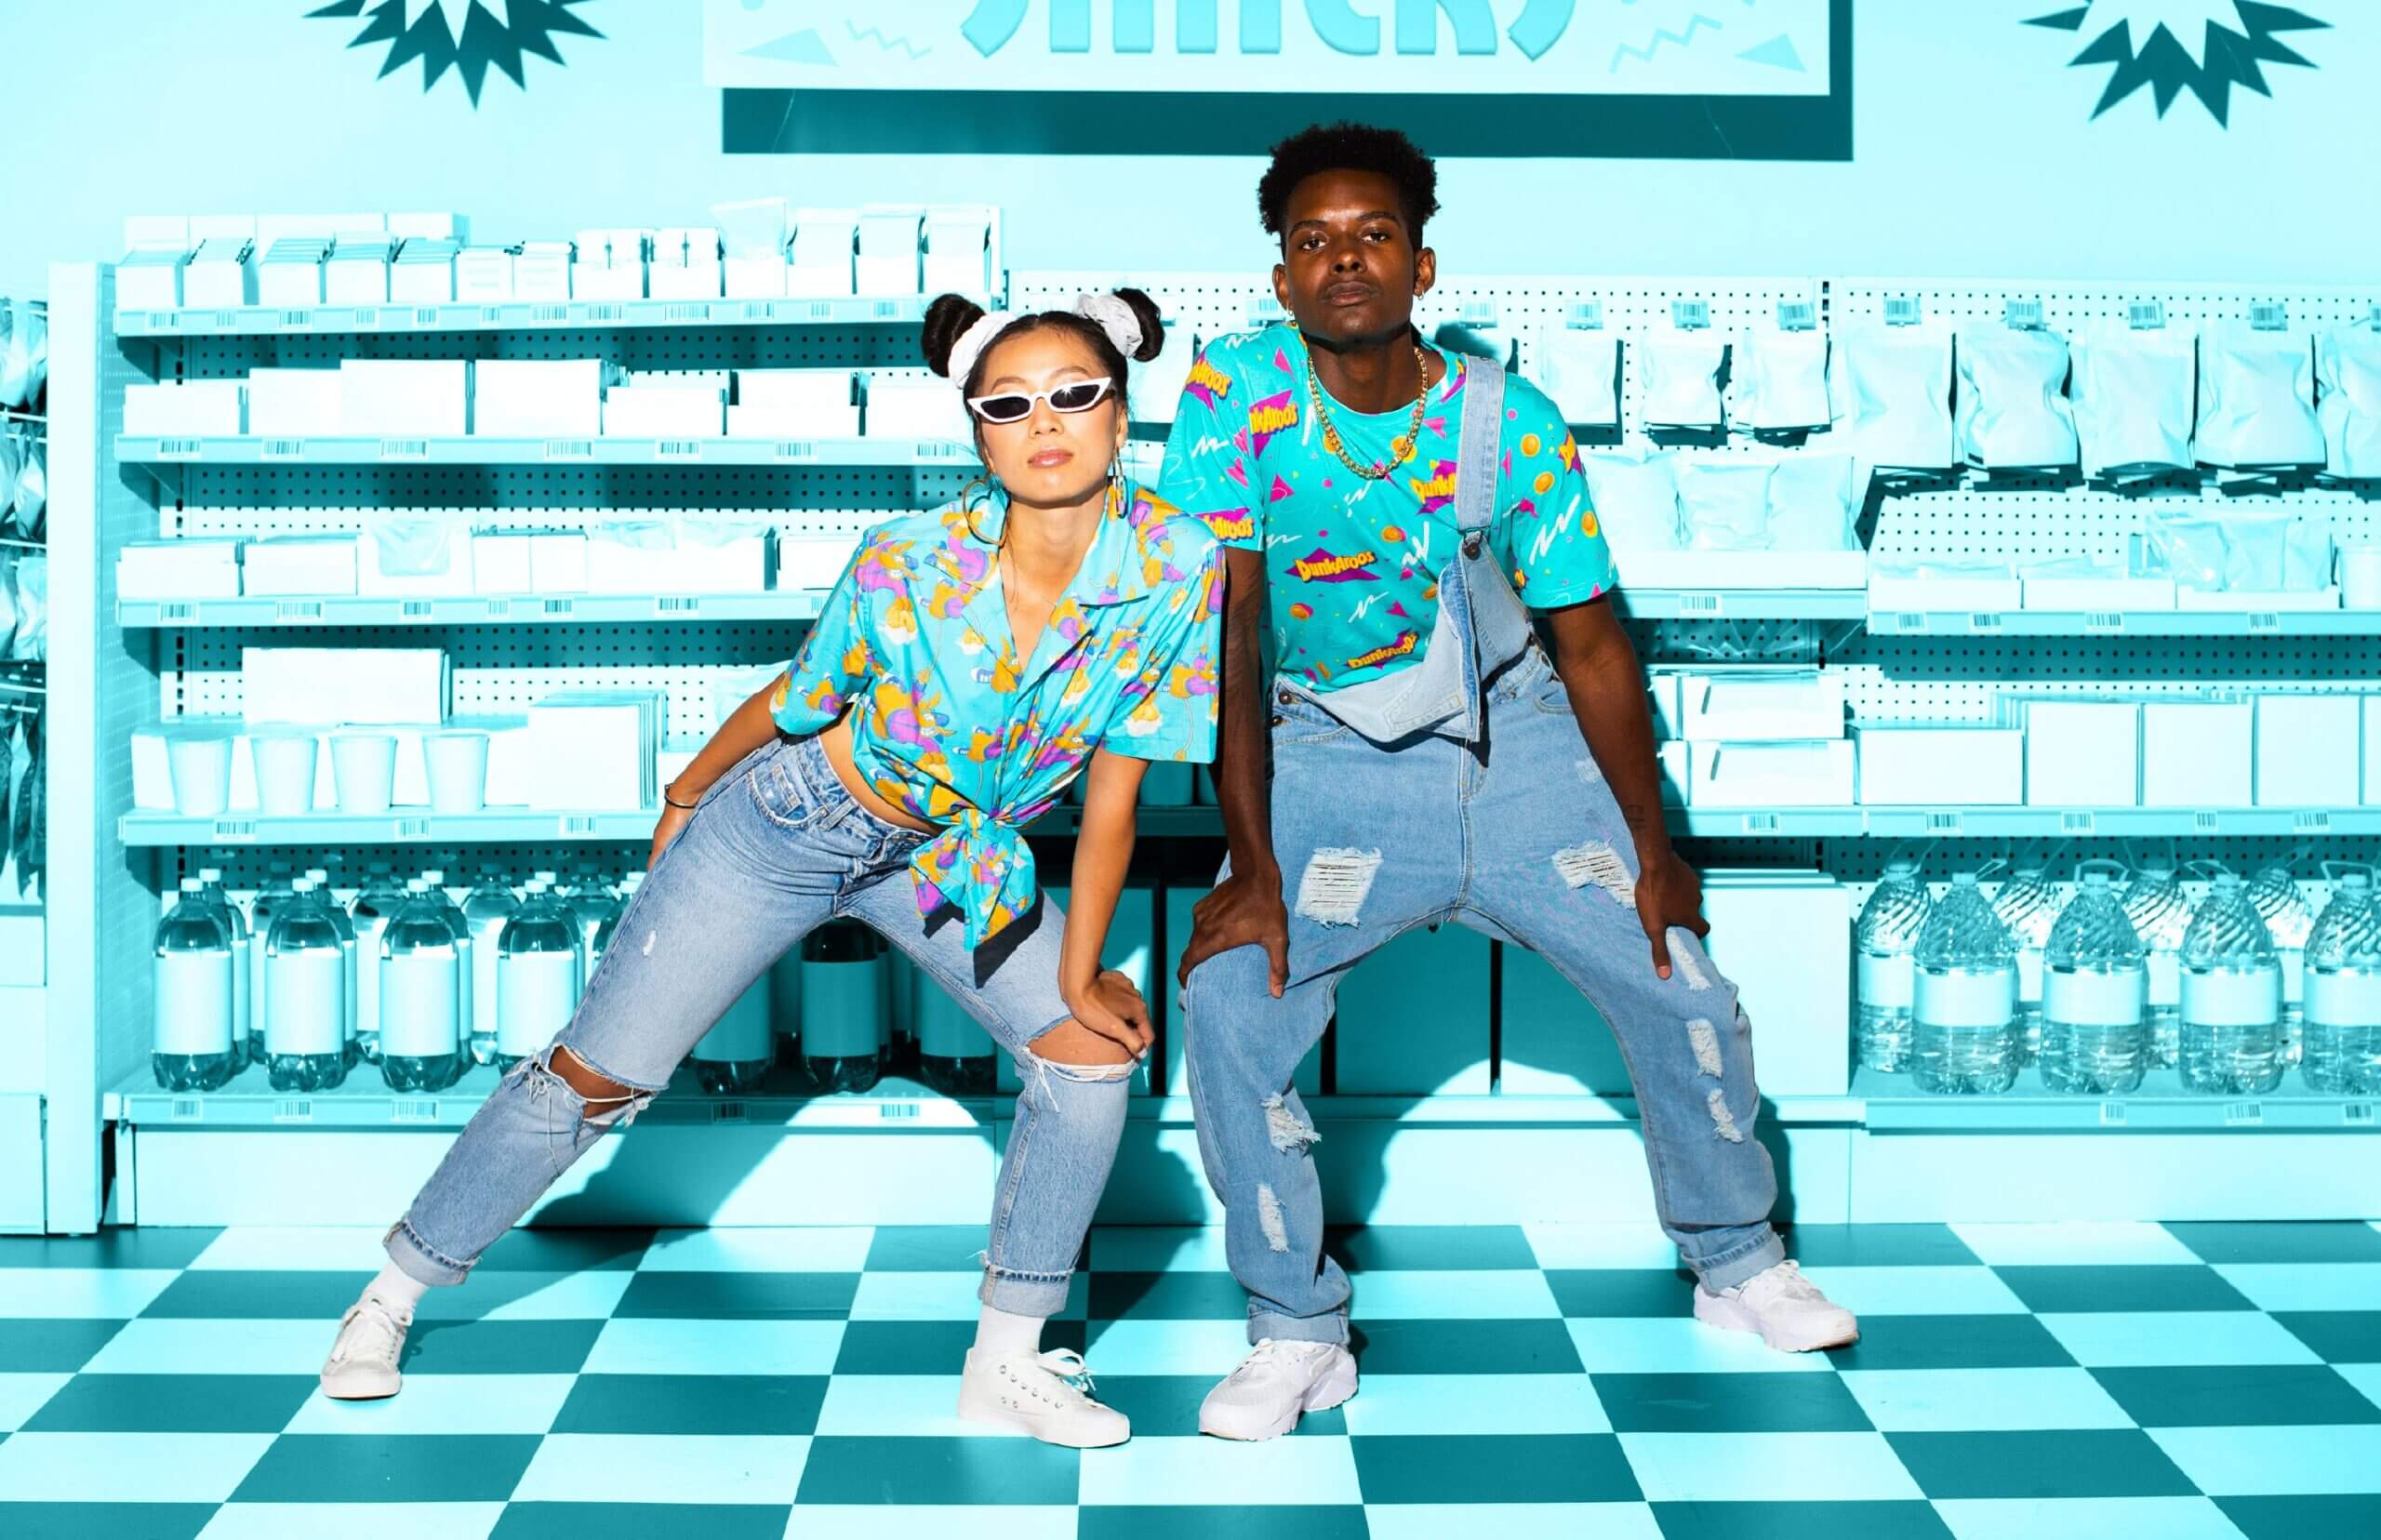 Two people in Dunkaroos merchandise standing in an isle of a store